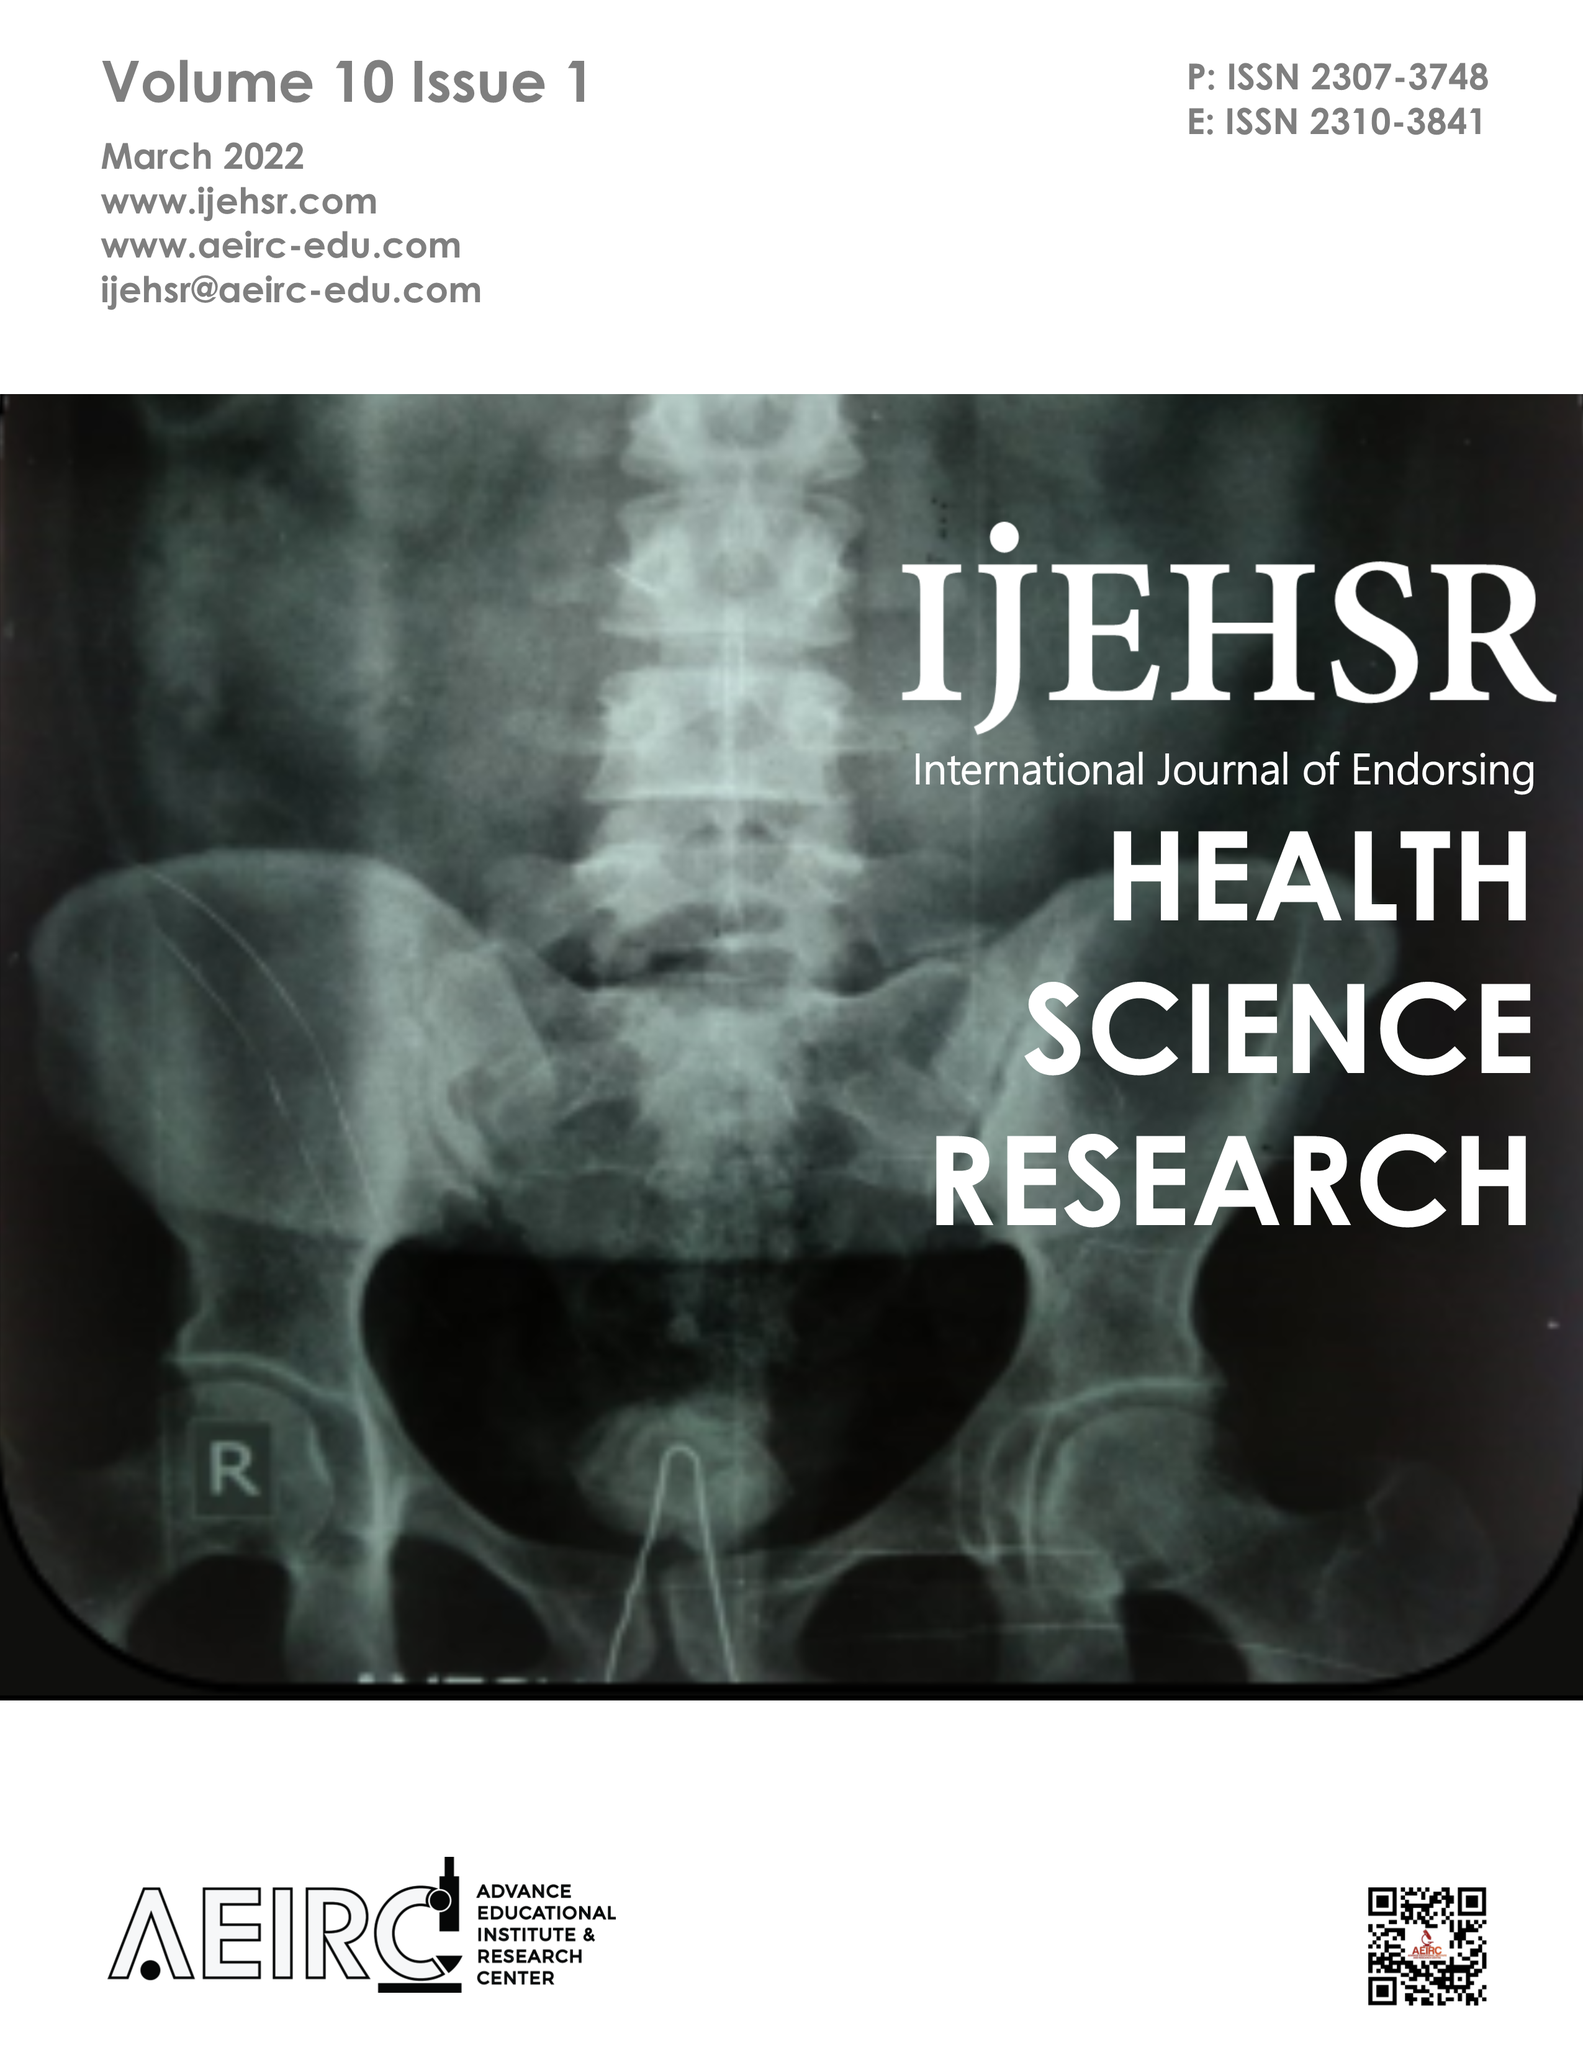 					View Vol. 10 No. 1 (2022): International Journal of Endorsing Health Science Research
				